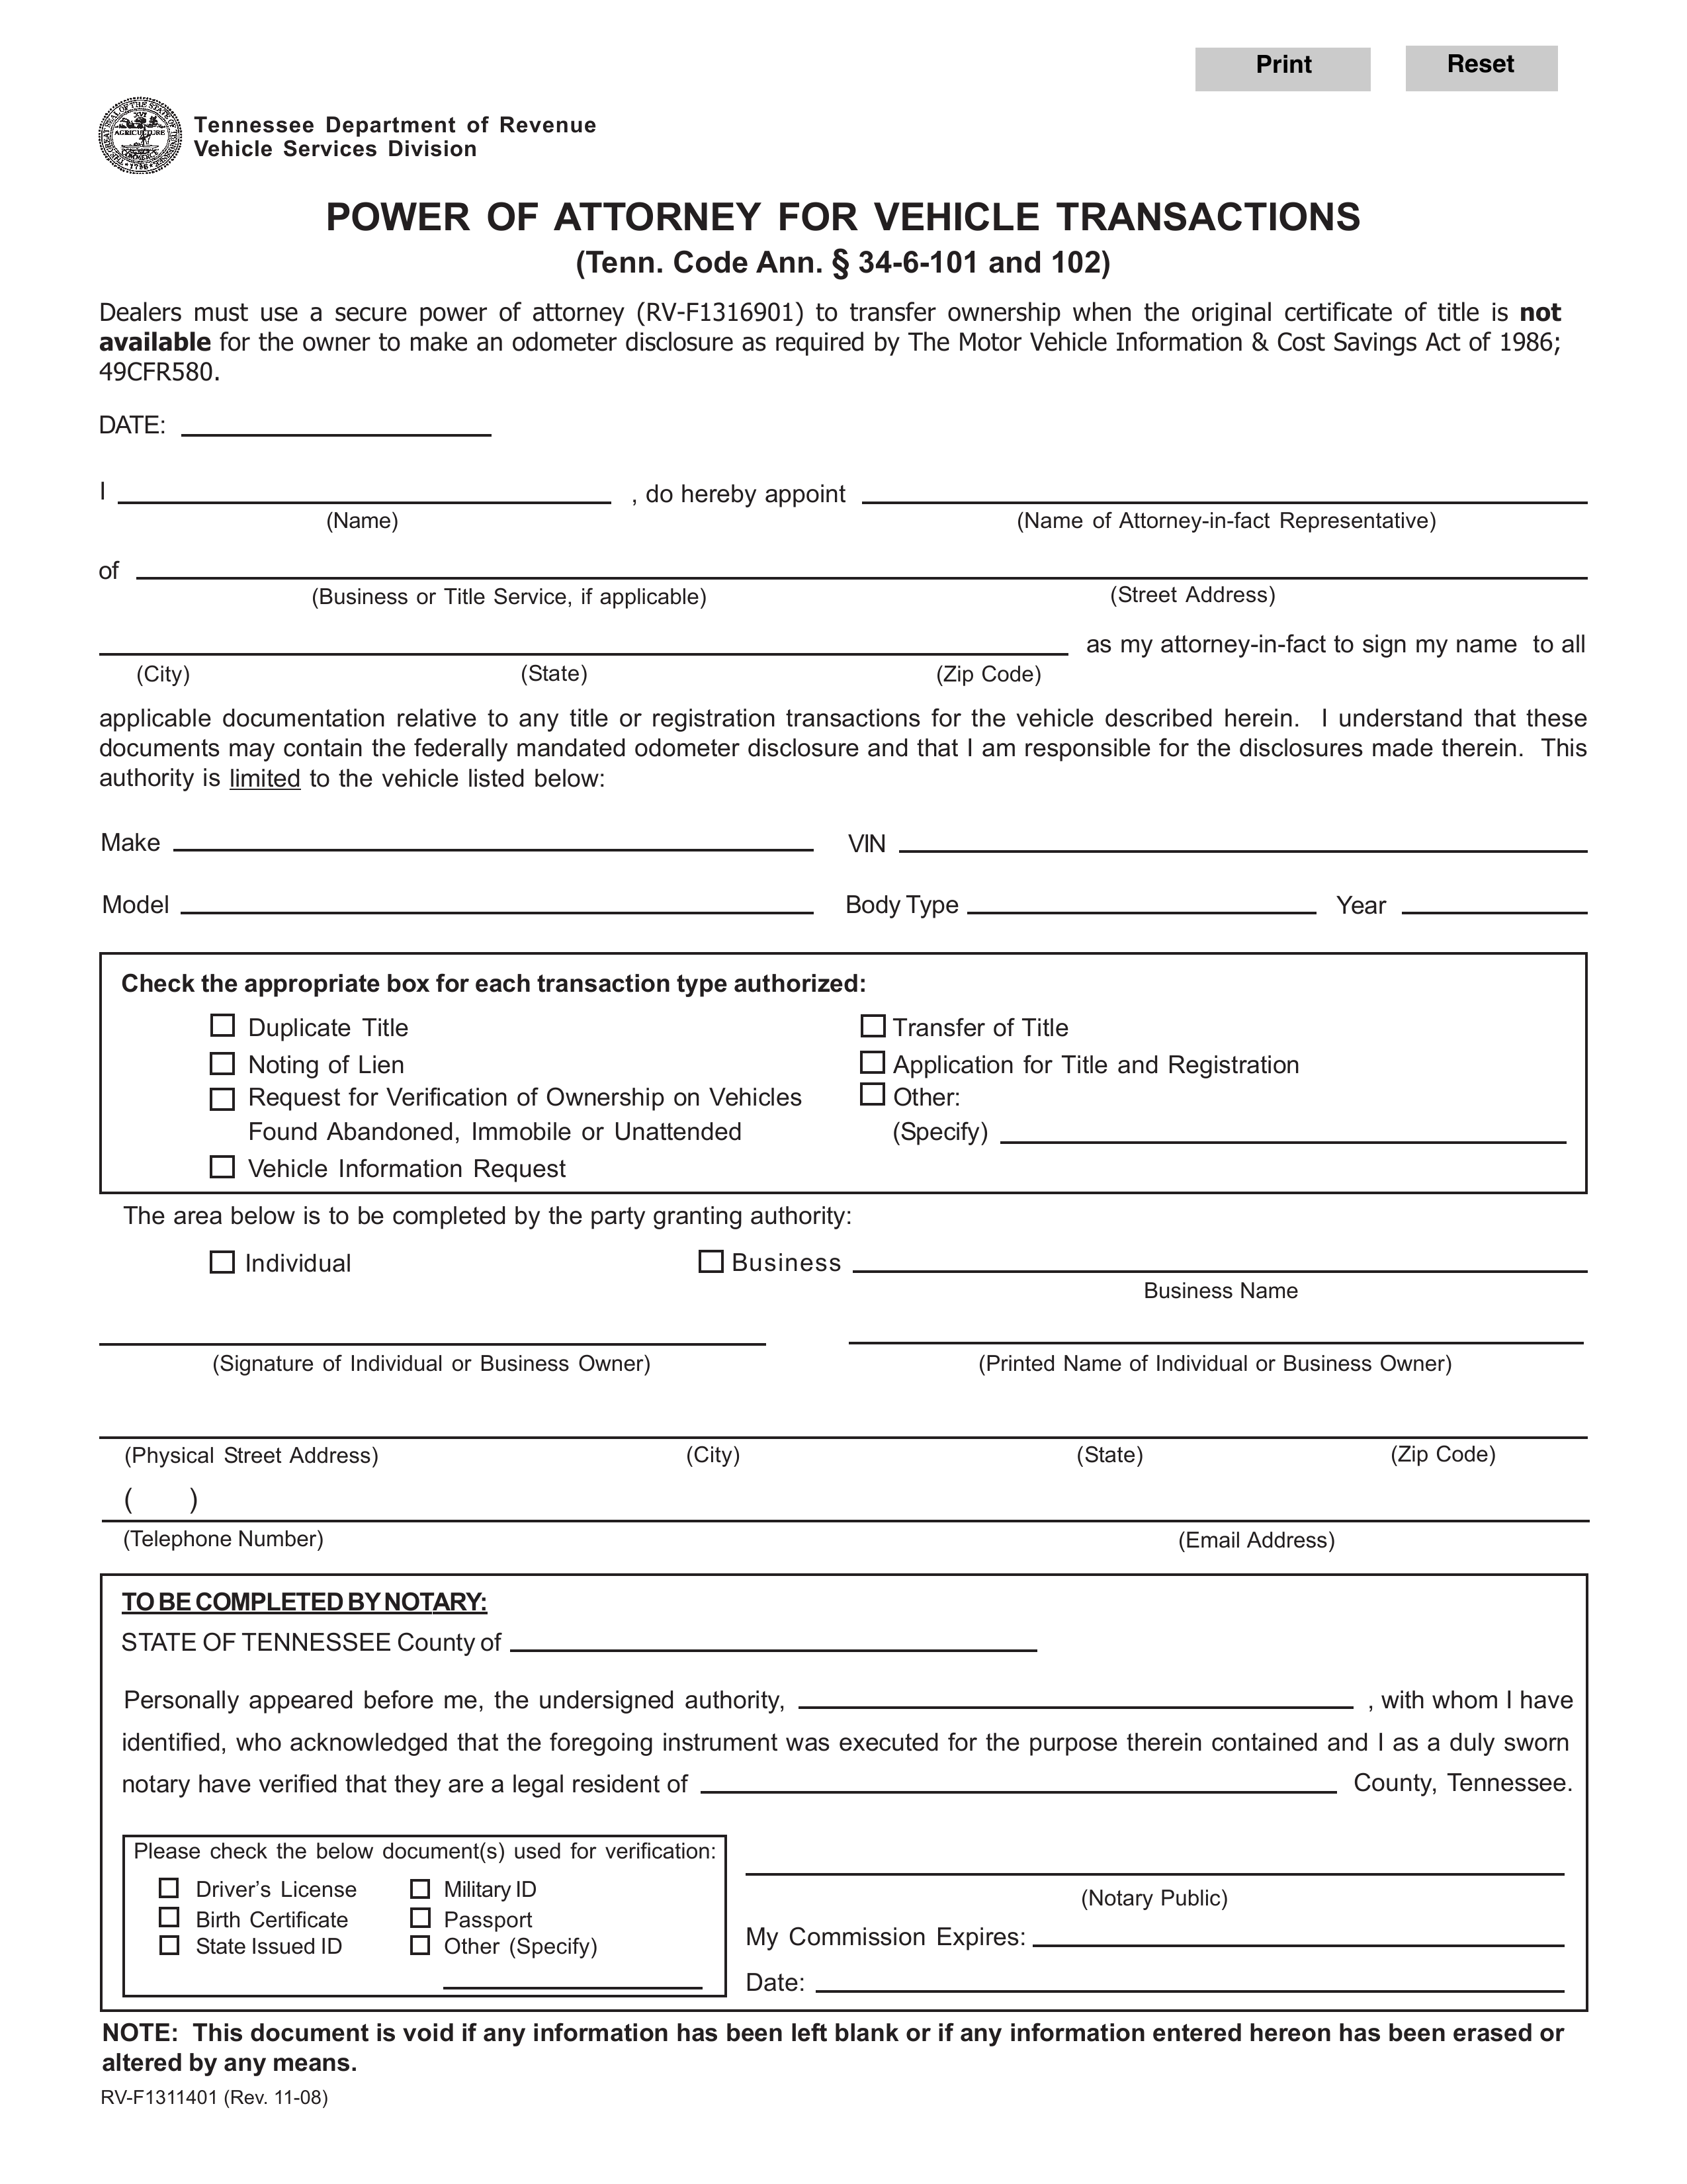 Tennessee Vehicle Power of Attorney (Form RV-F1311401)